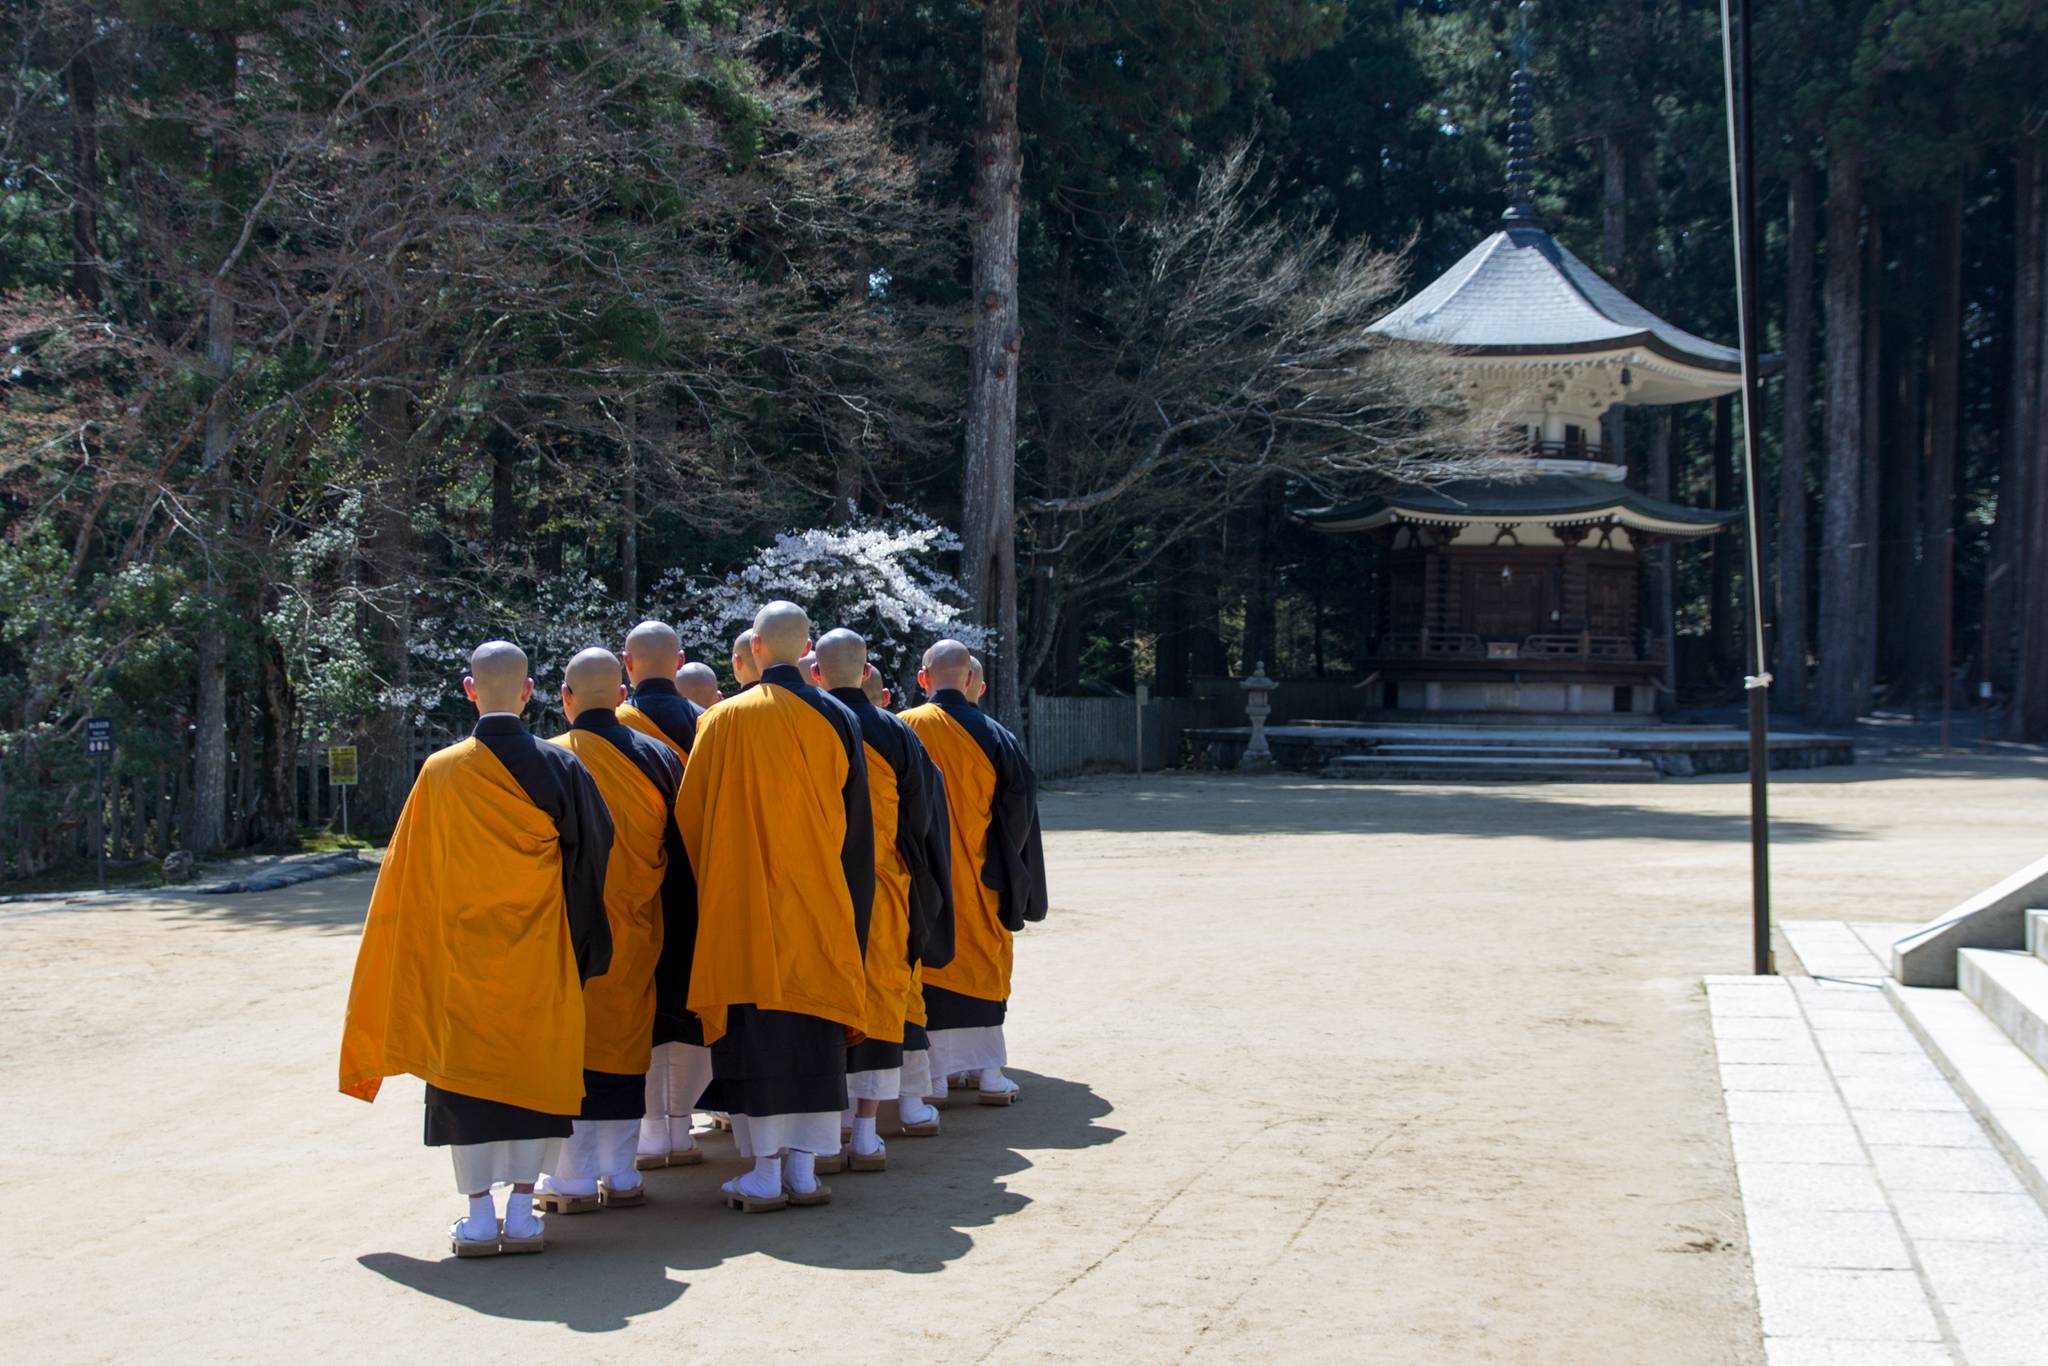 Amazon now delivers monks in Japan